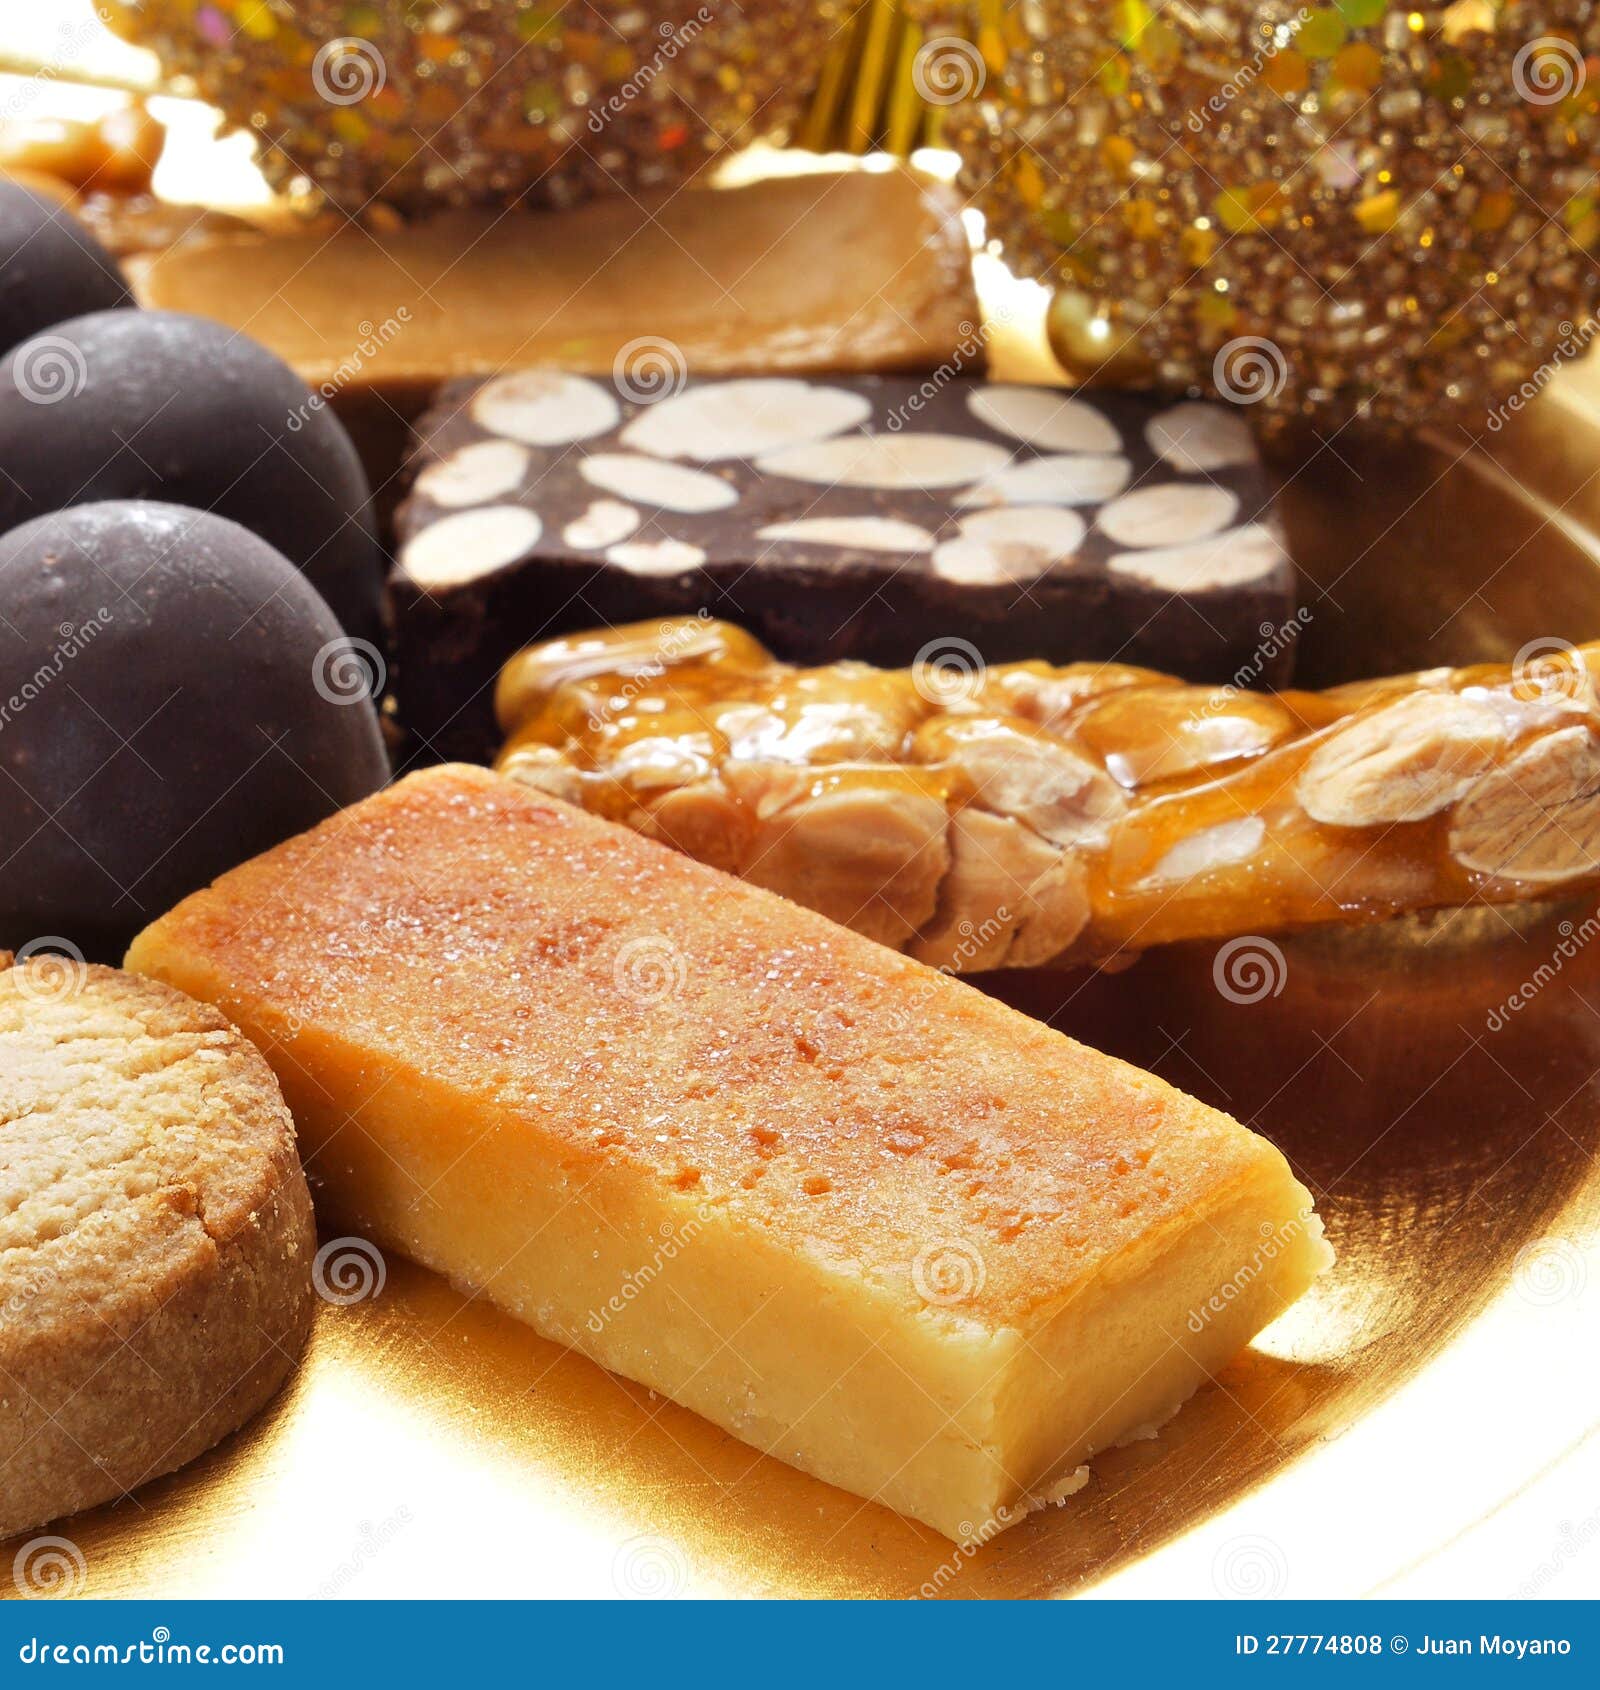 Closeup of a pile of turron, mantecados and polvorones, typical spanish christmas sweets